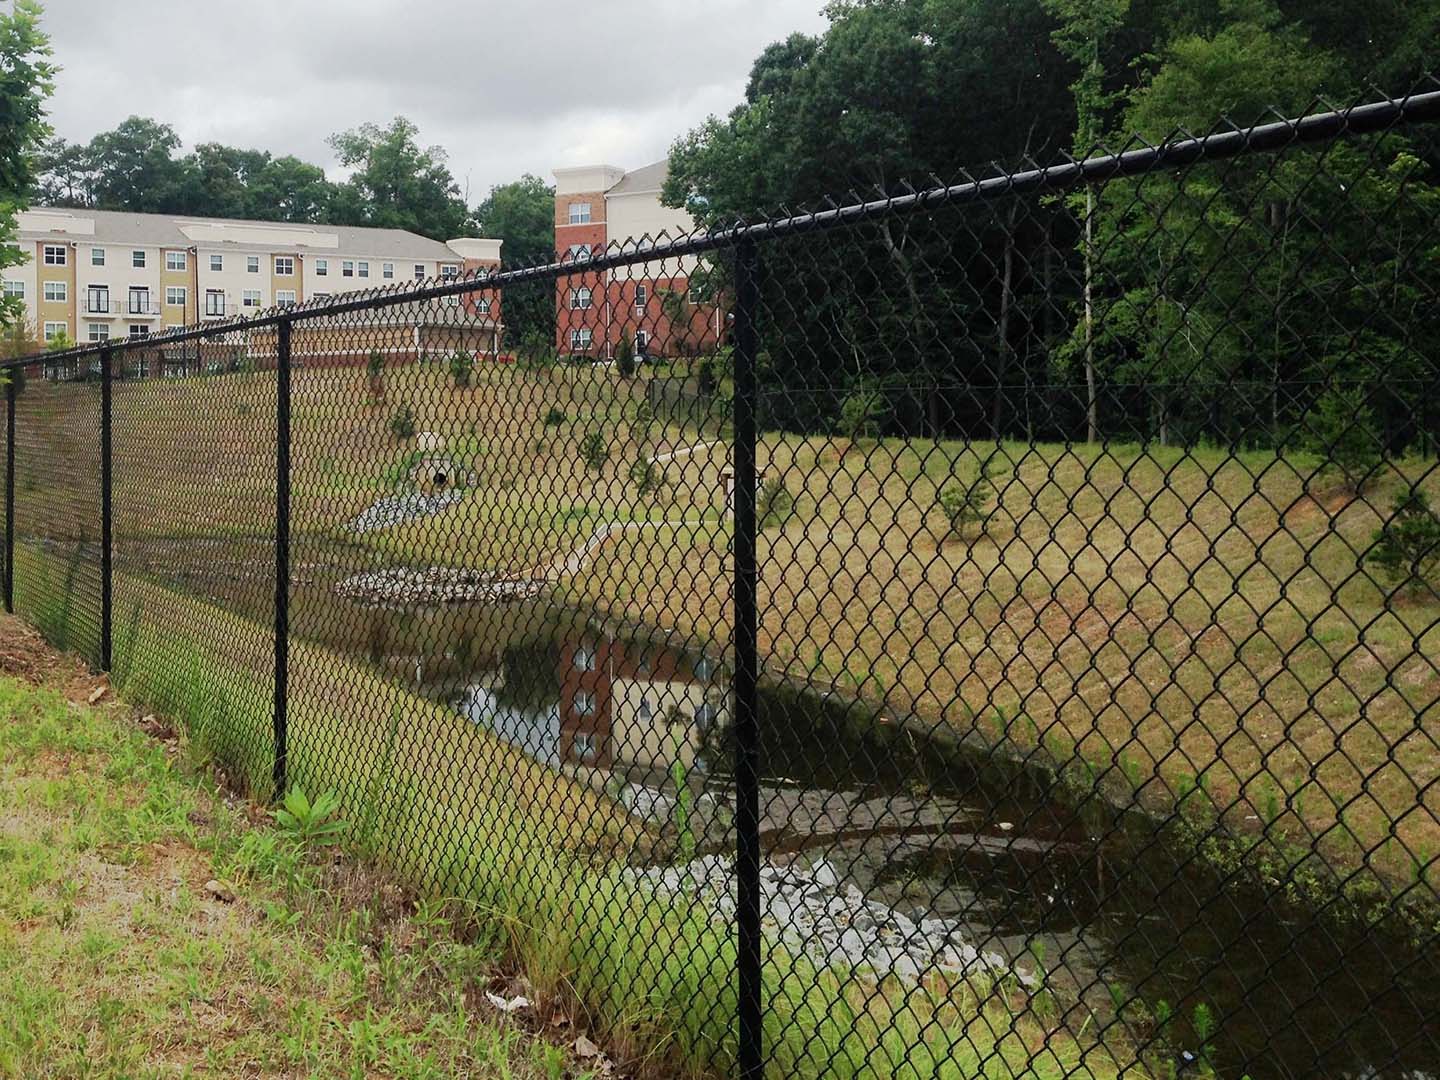 Commercial Chain Link Fence in Atlanta GA